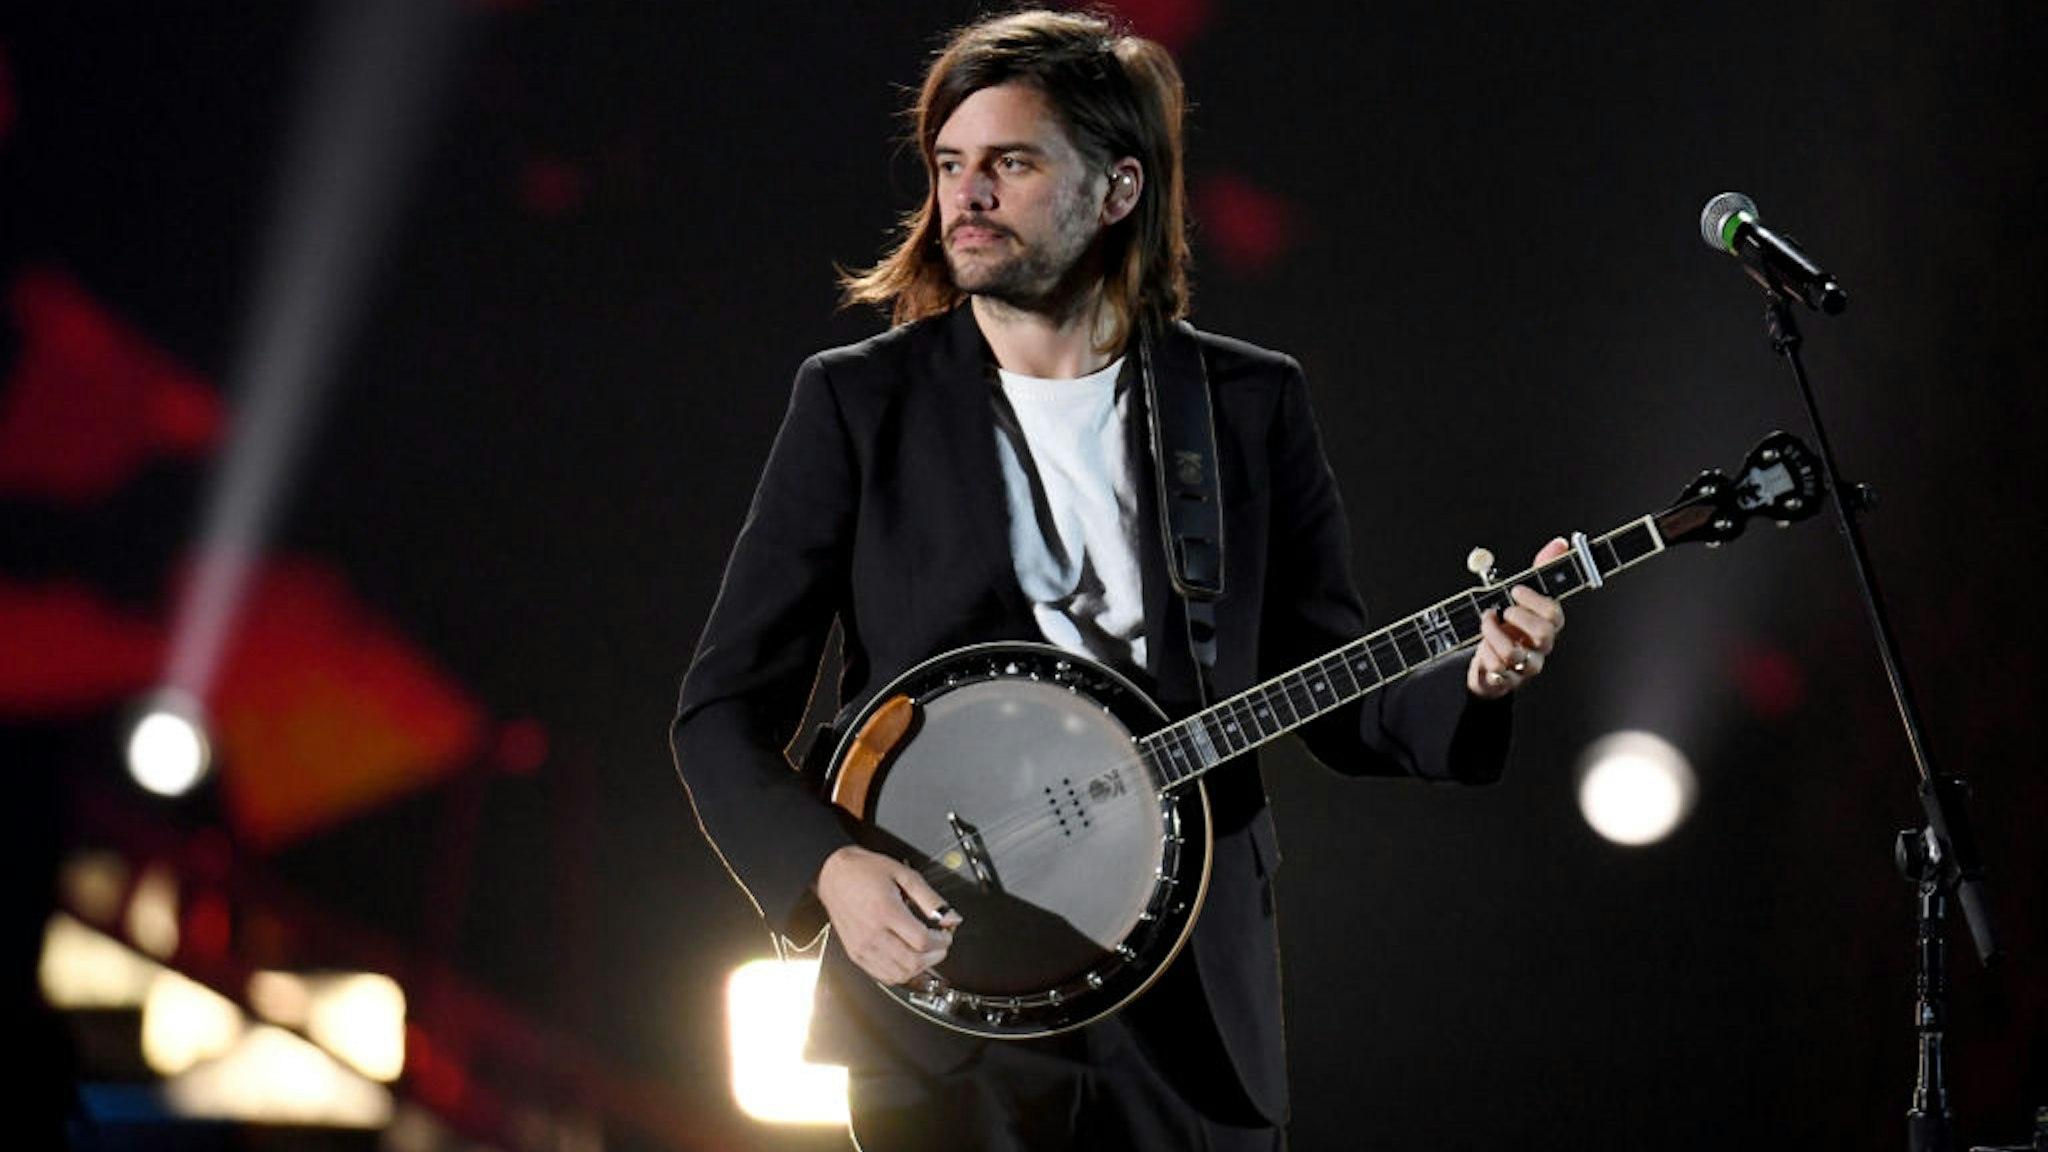 LAS VEGAS, NEVADA - SEPTEMBER 21: Winston Marshall of Mumford & Sons performs onstage during the 2019 iHeartRadio Music Festival at T-Mobile Arena on September 21, 2019 in Las Vegas, Nevada. (Photo by Ethan Miller/Getty Images)